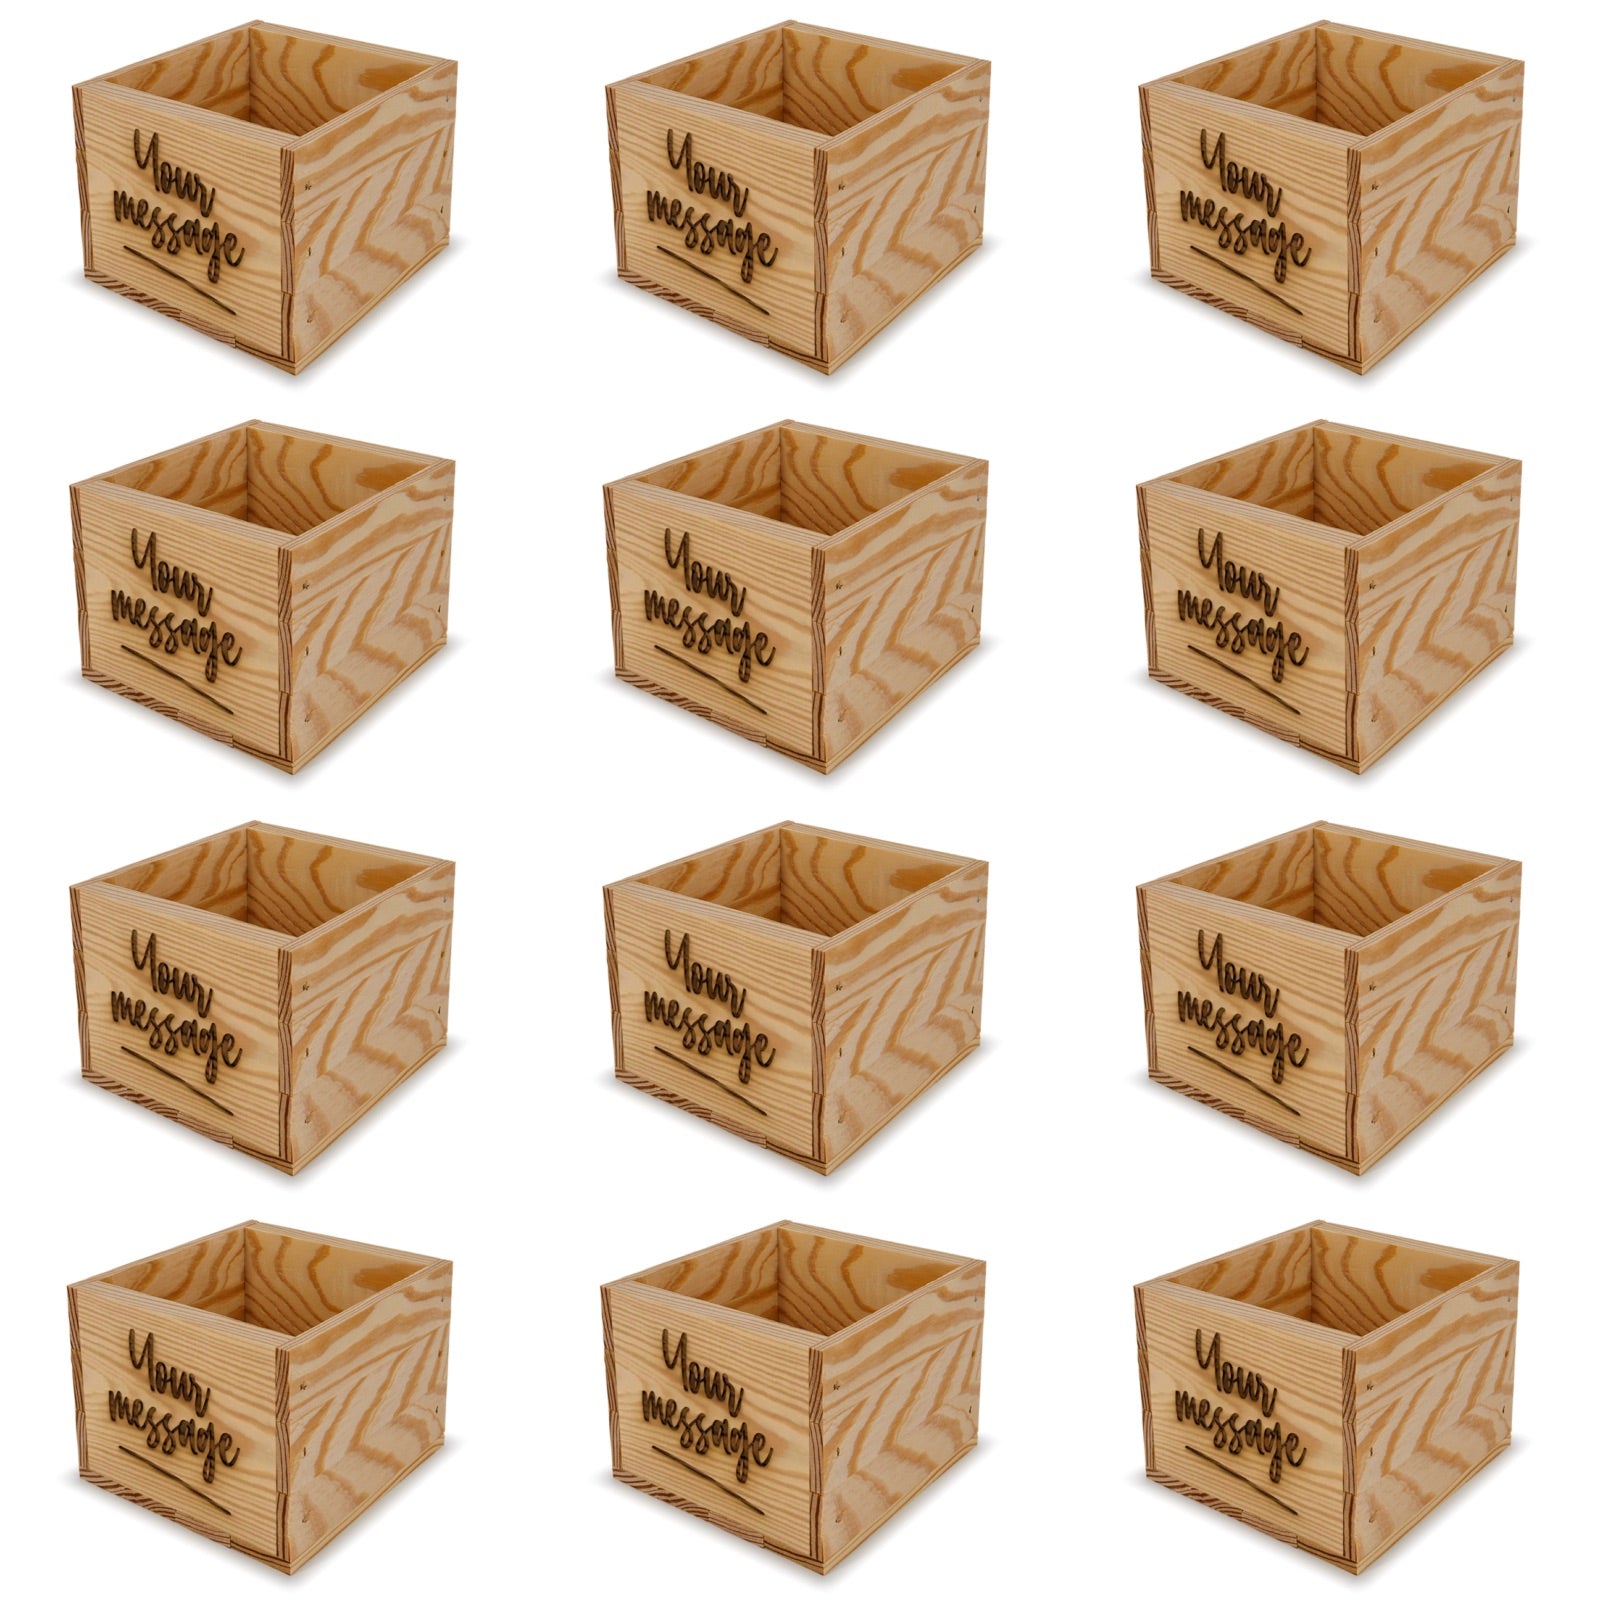 12 Small wooden crates with custom message 6x6.25x5.25